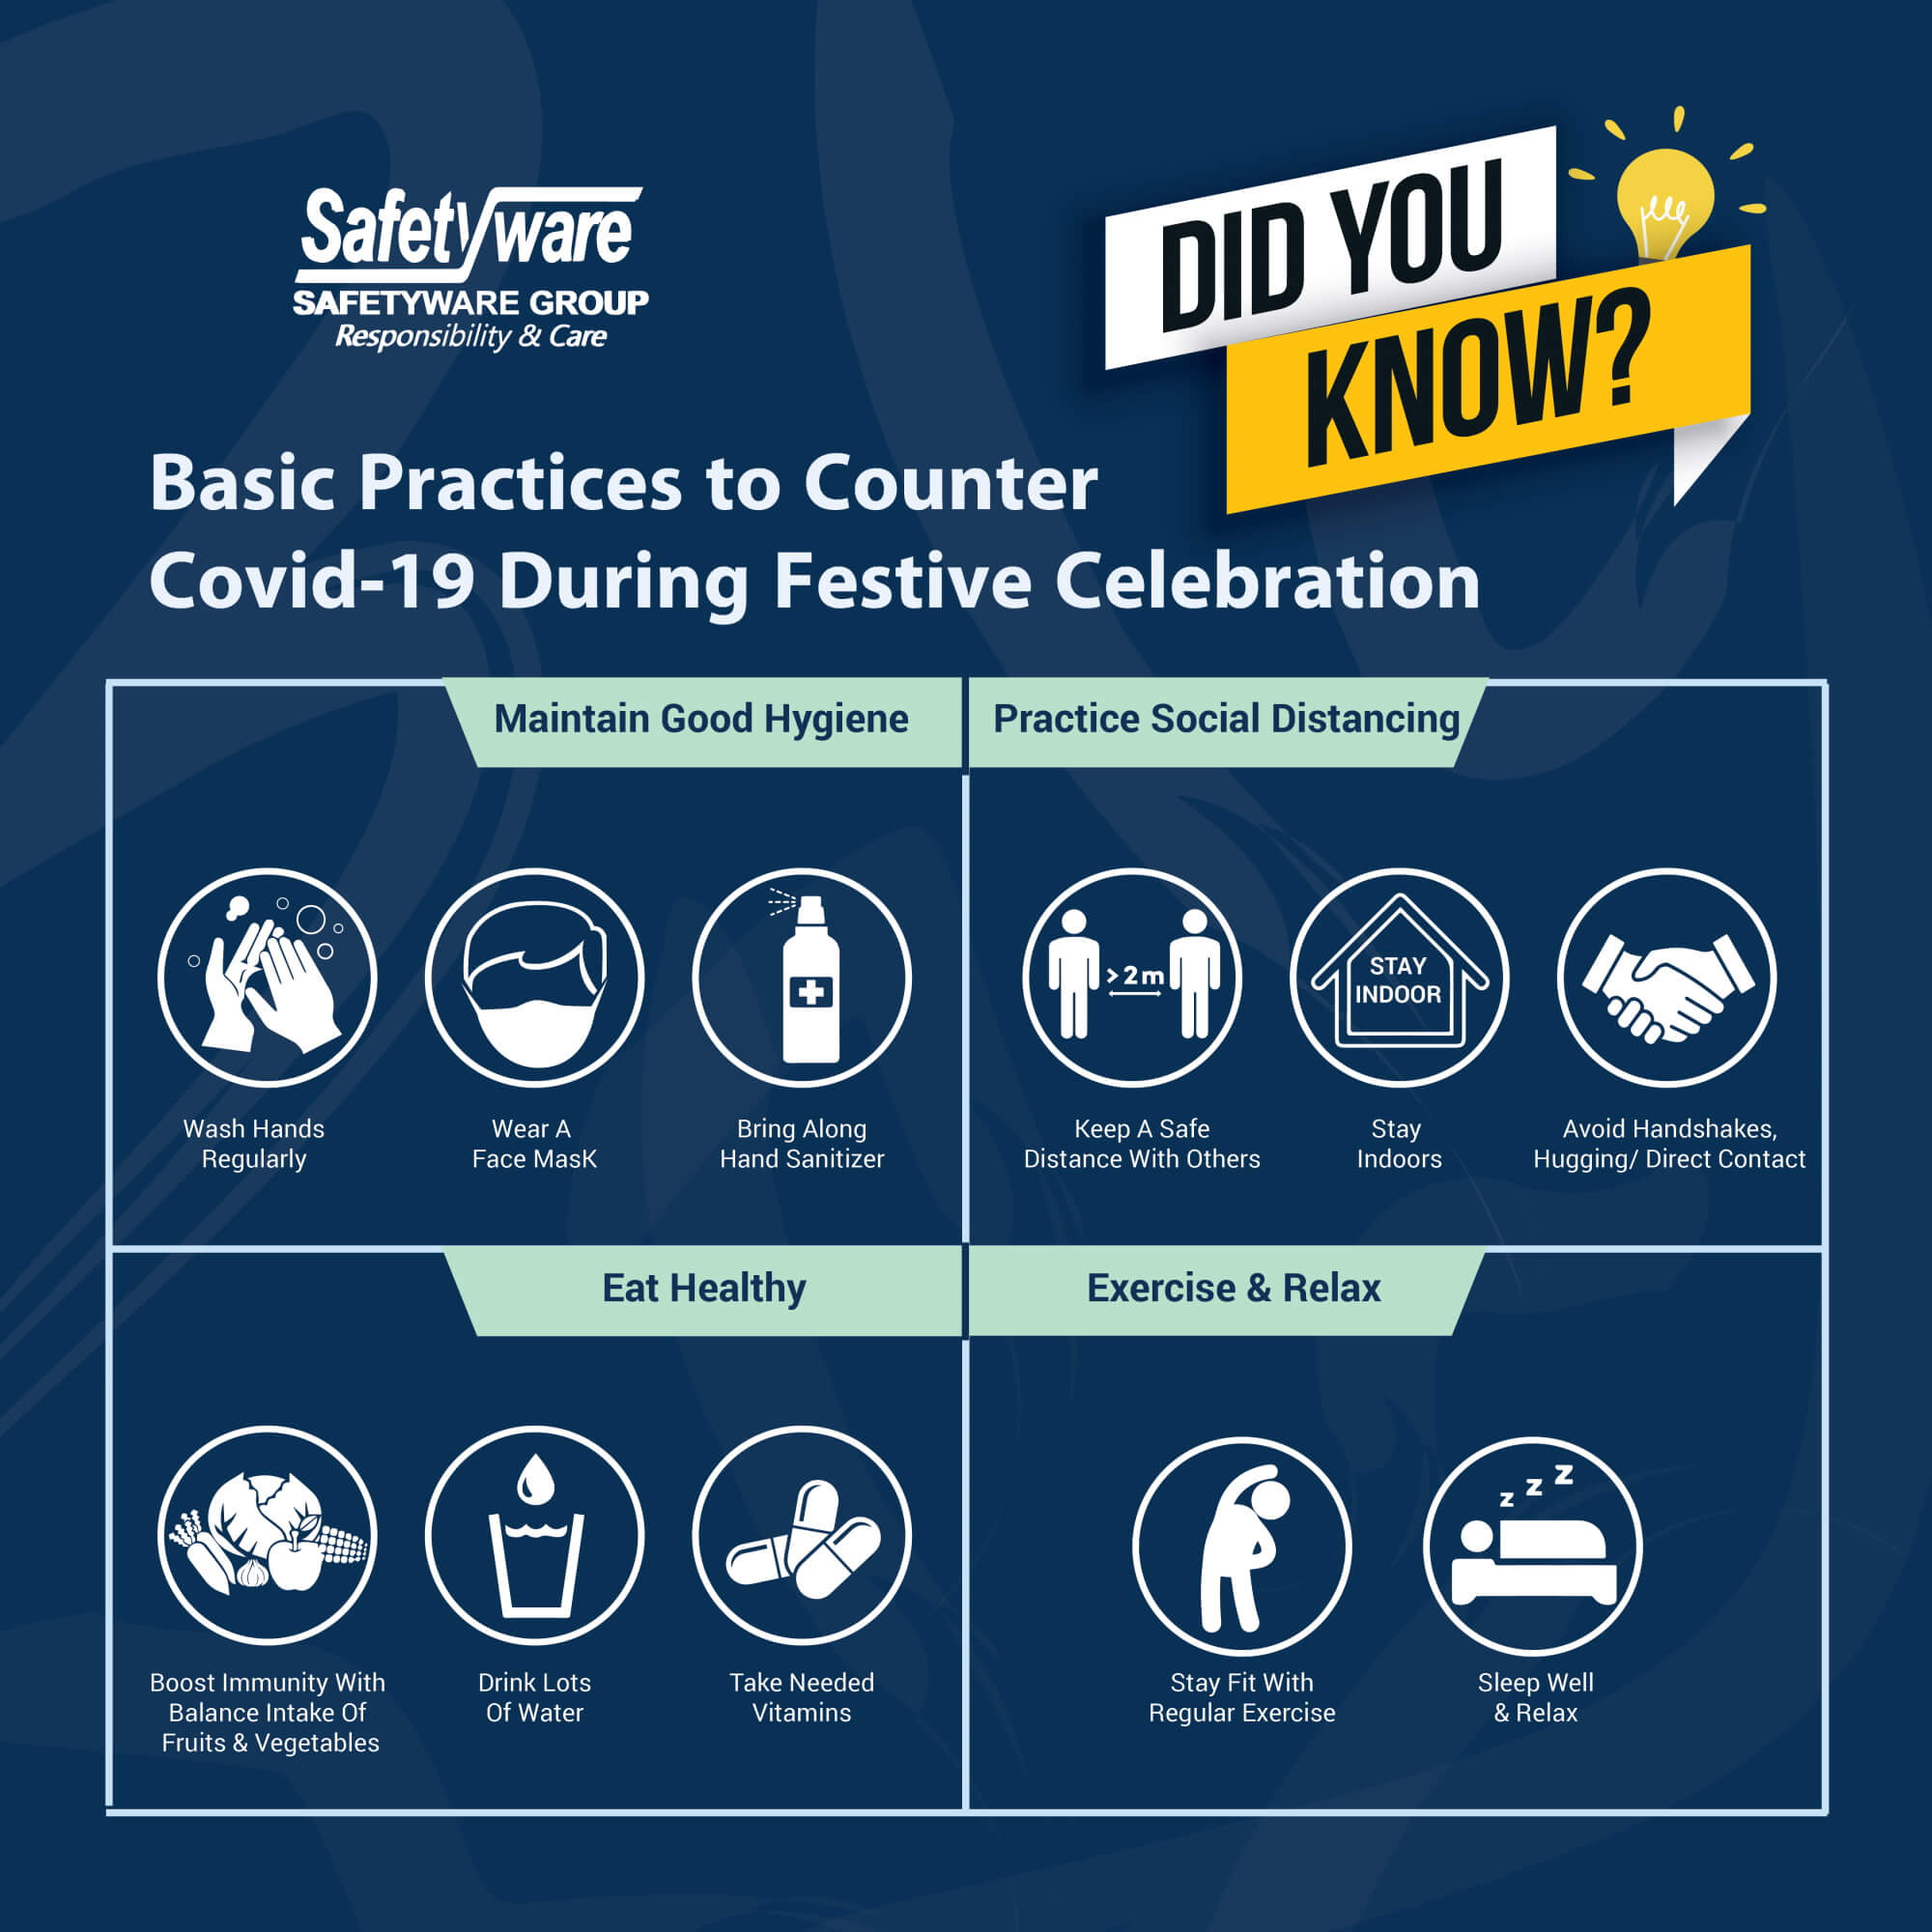 Basic Practices to Counter Covid-19 During Festive Celebration